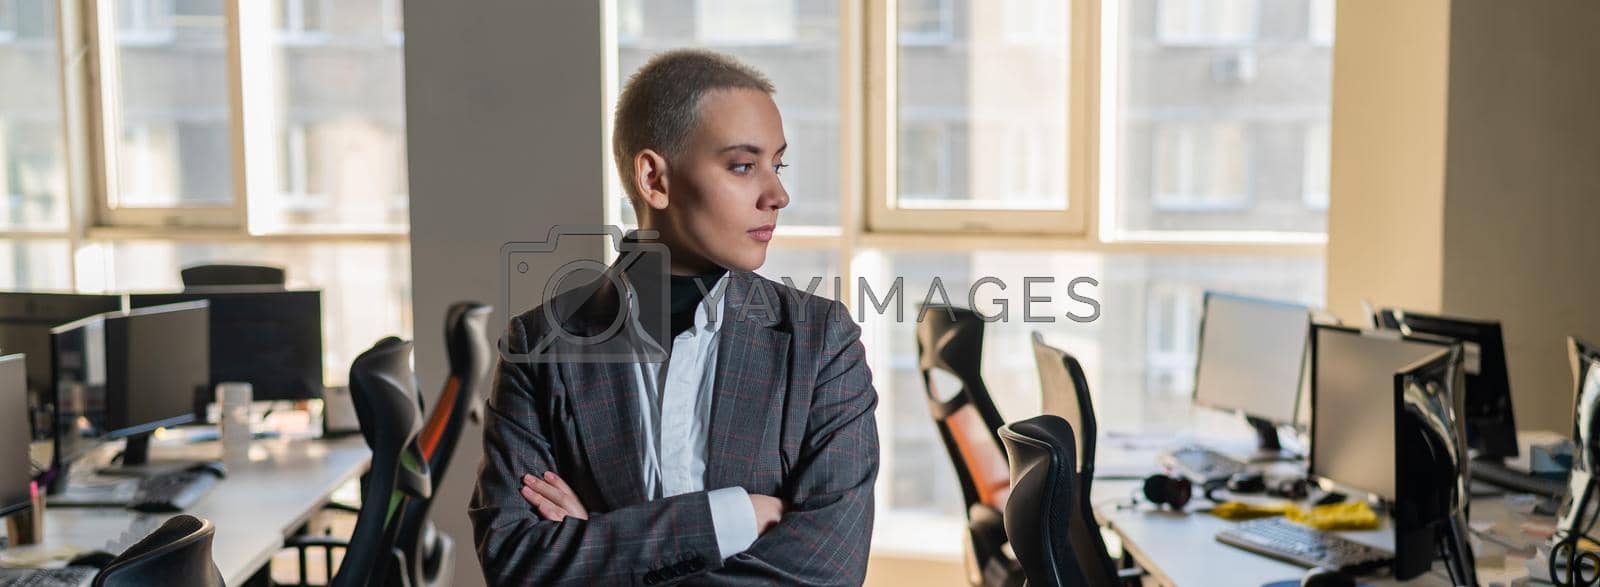 Royalty free image of Business woman with short haircut in empty office. by mrwed54